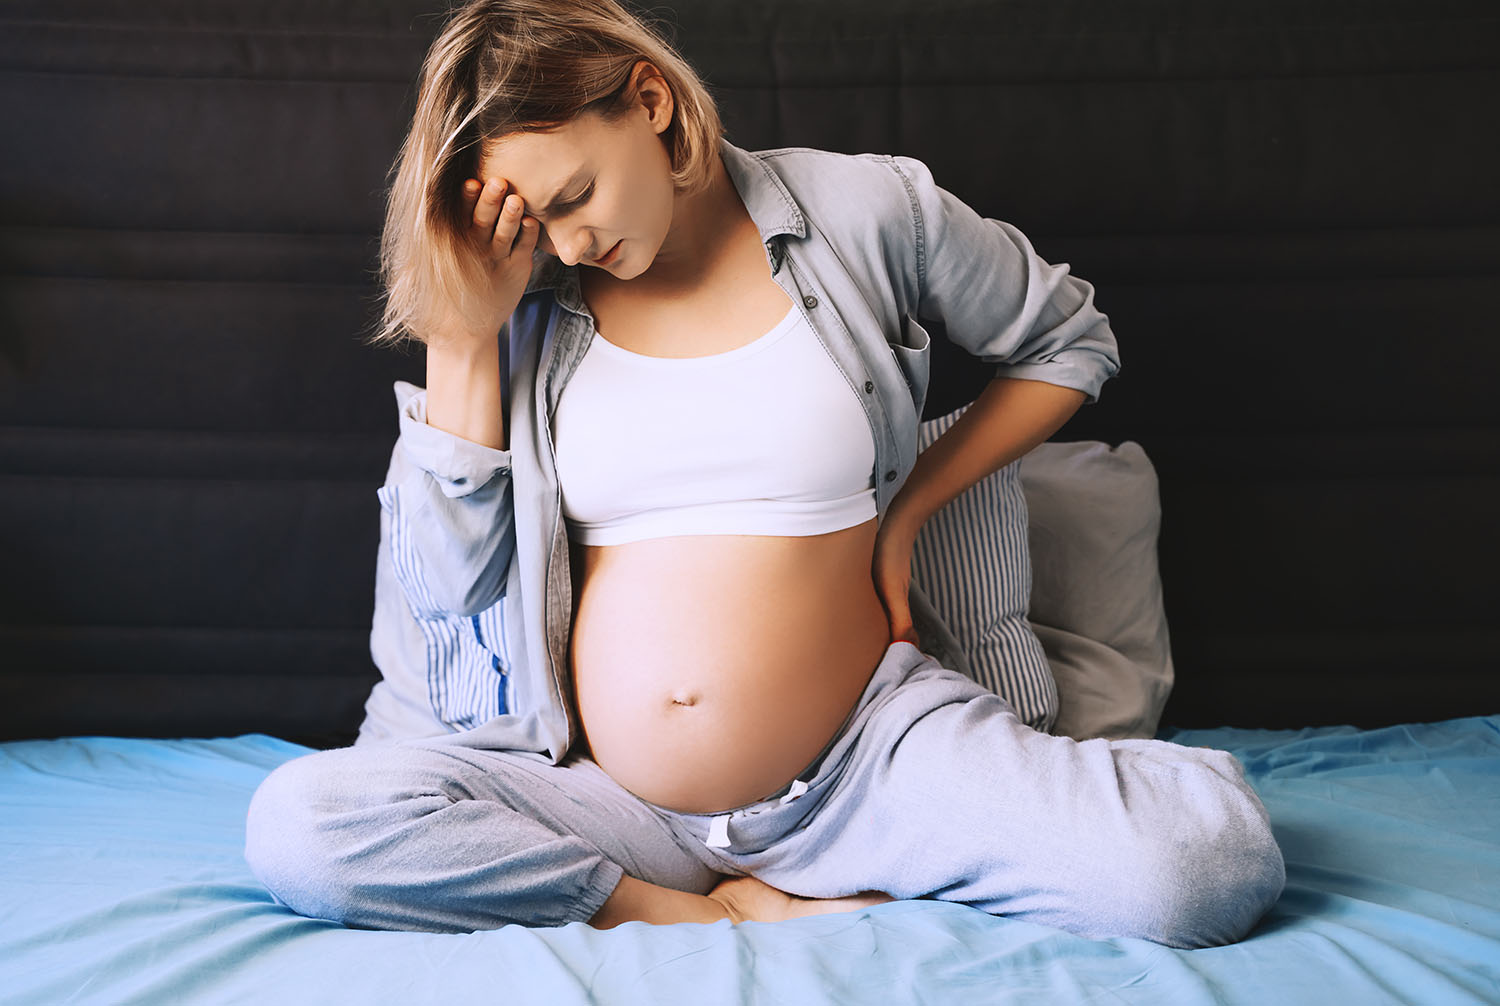 pregnant woman suffering from pregnancy issues